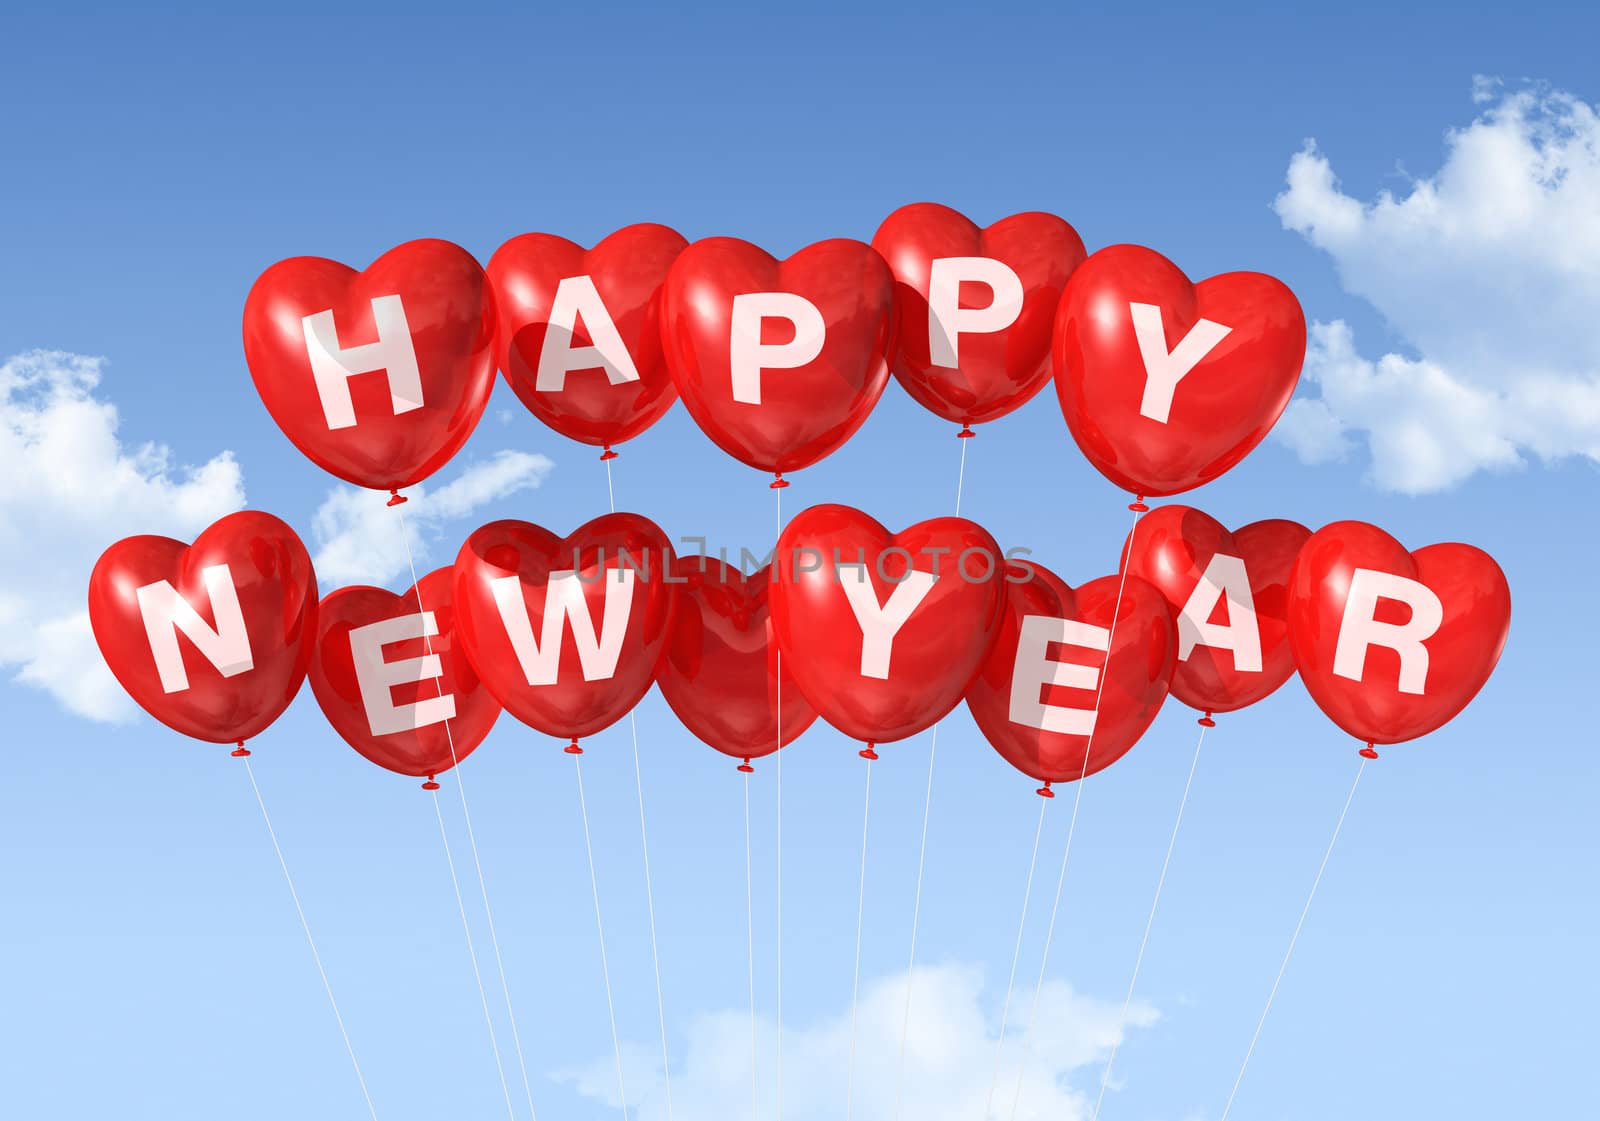 red Happy new year heart shaped balloons floating in a blue sky